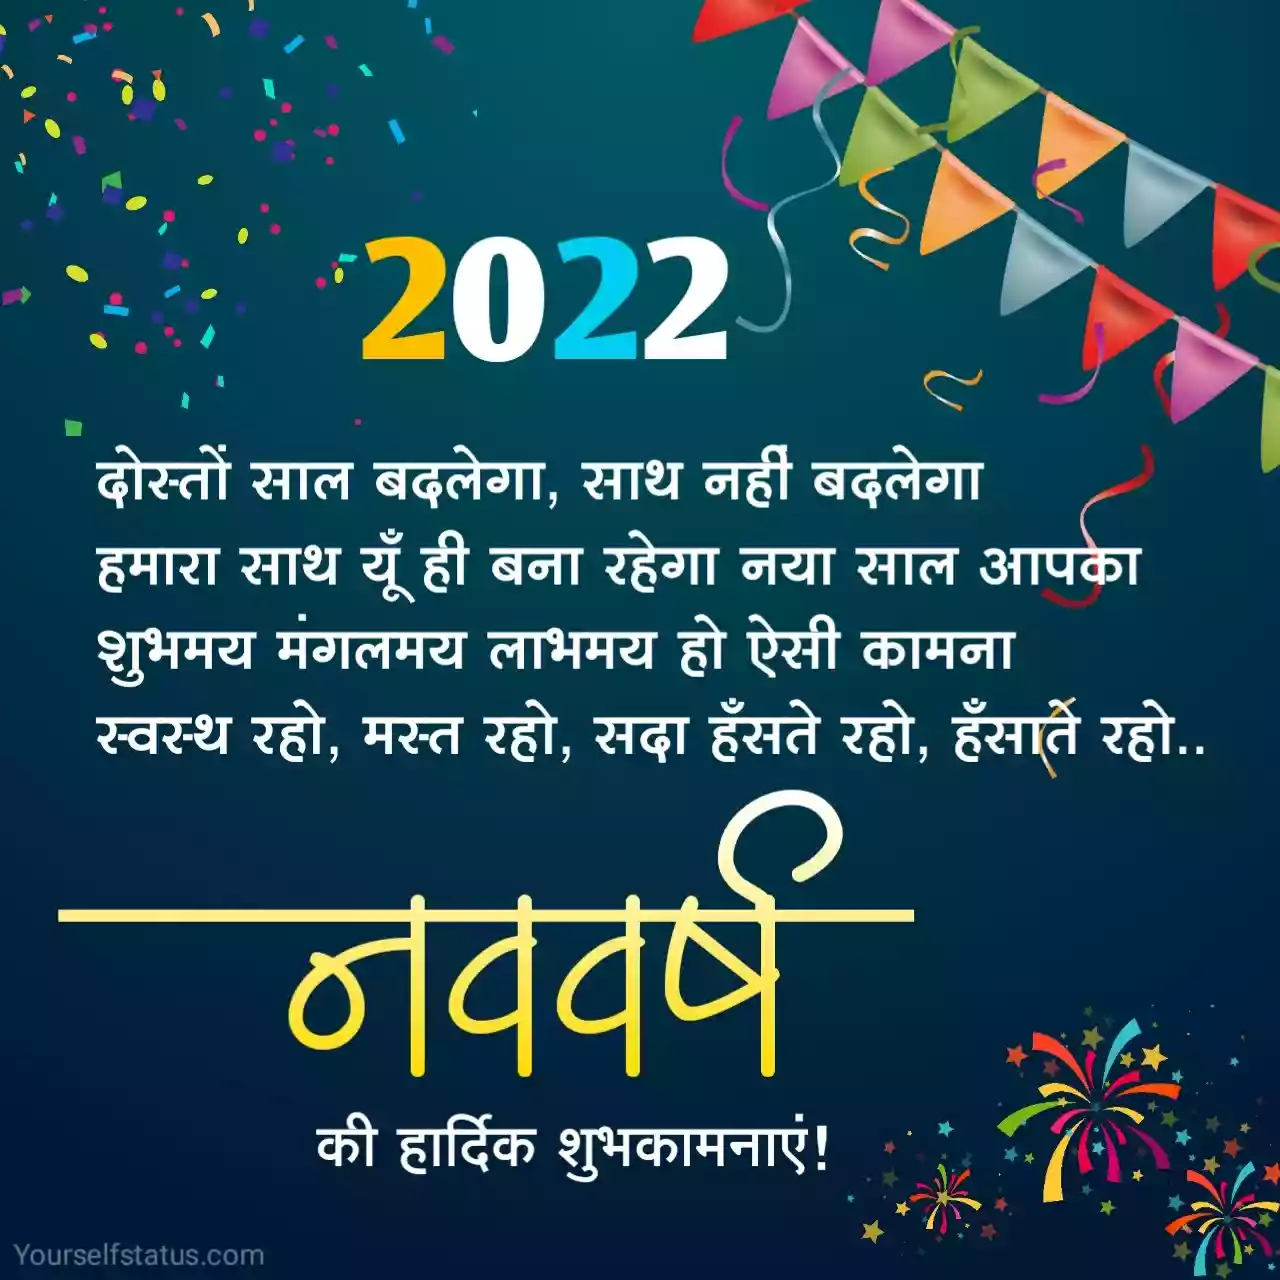 Happy new year wishes for friends in hindi